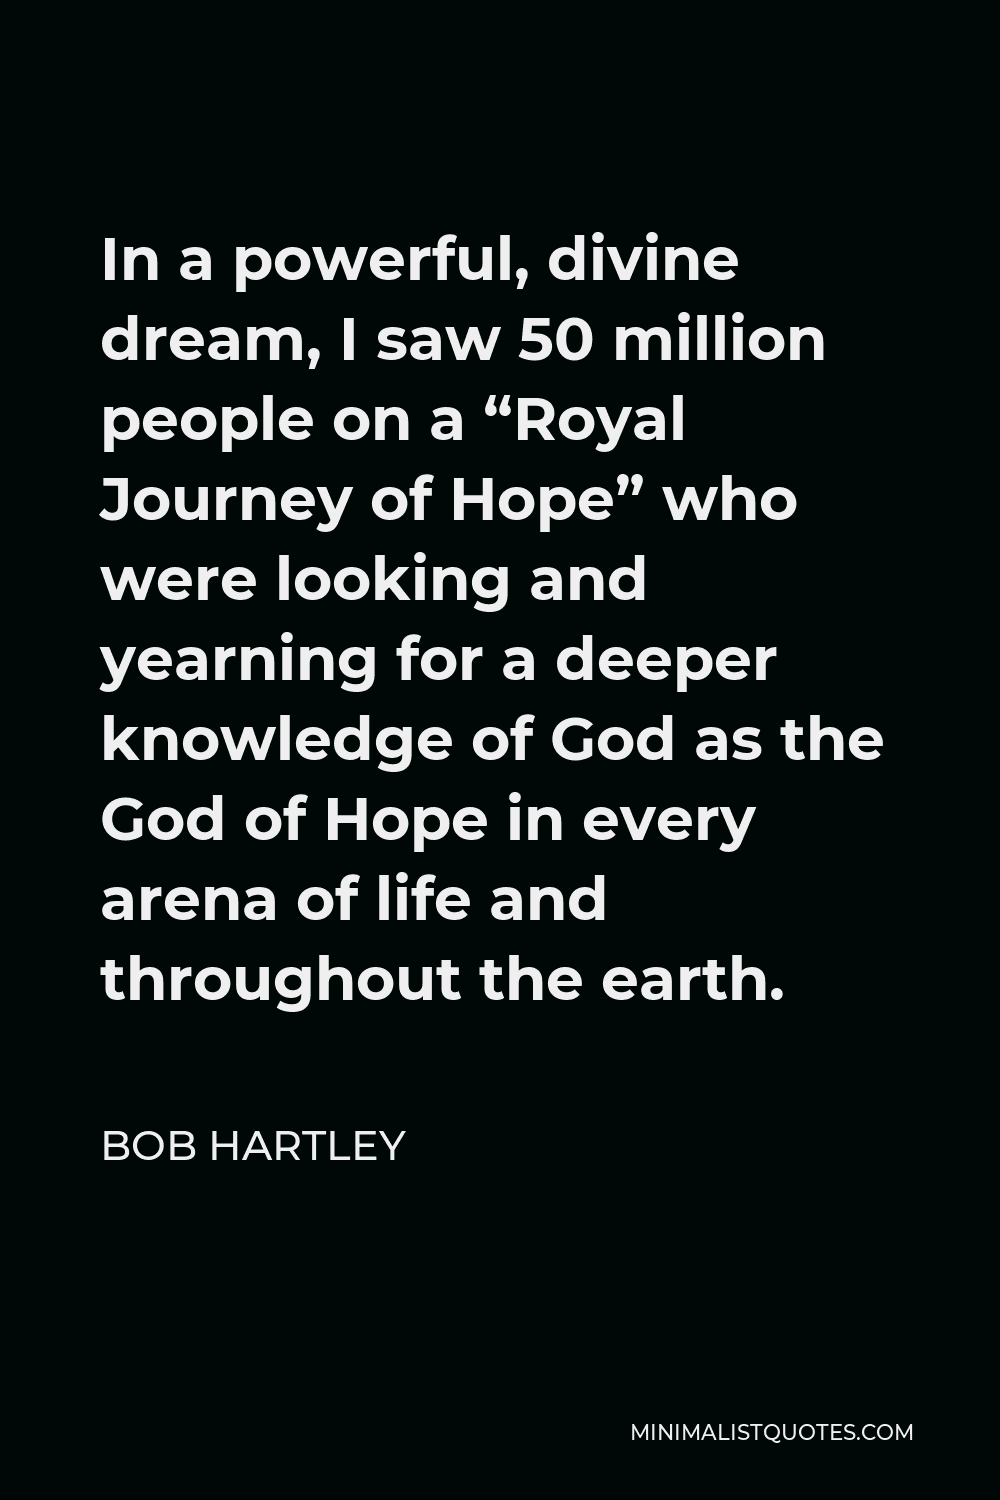 Bob Hartley Quote - In a powerful, divine dream, I saw 50 million people on a “Royal Journey of Hope” who were looking and yearning for a deeper knowledge of God as the God of Hope in every arena of life and throughout the earth.